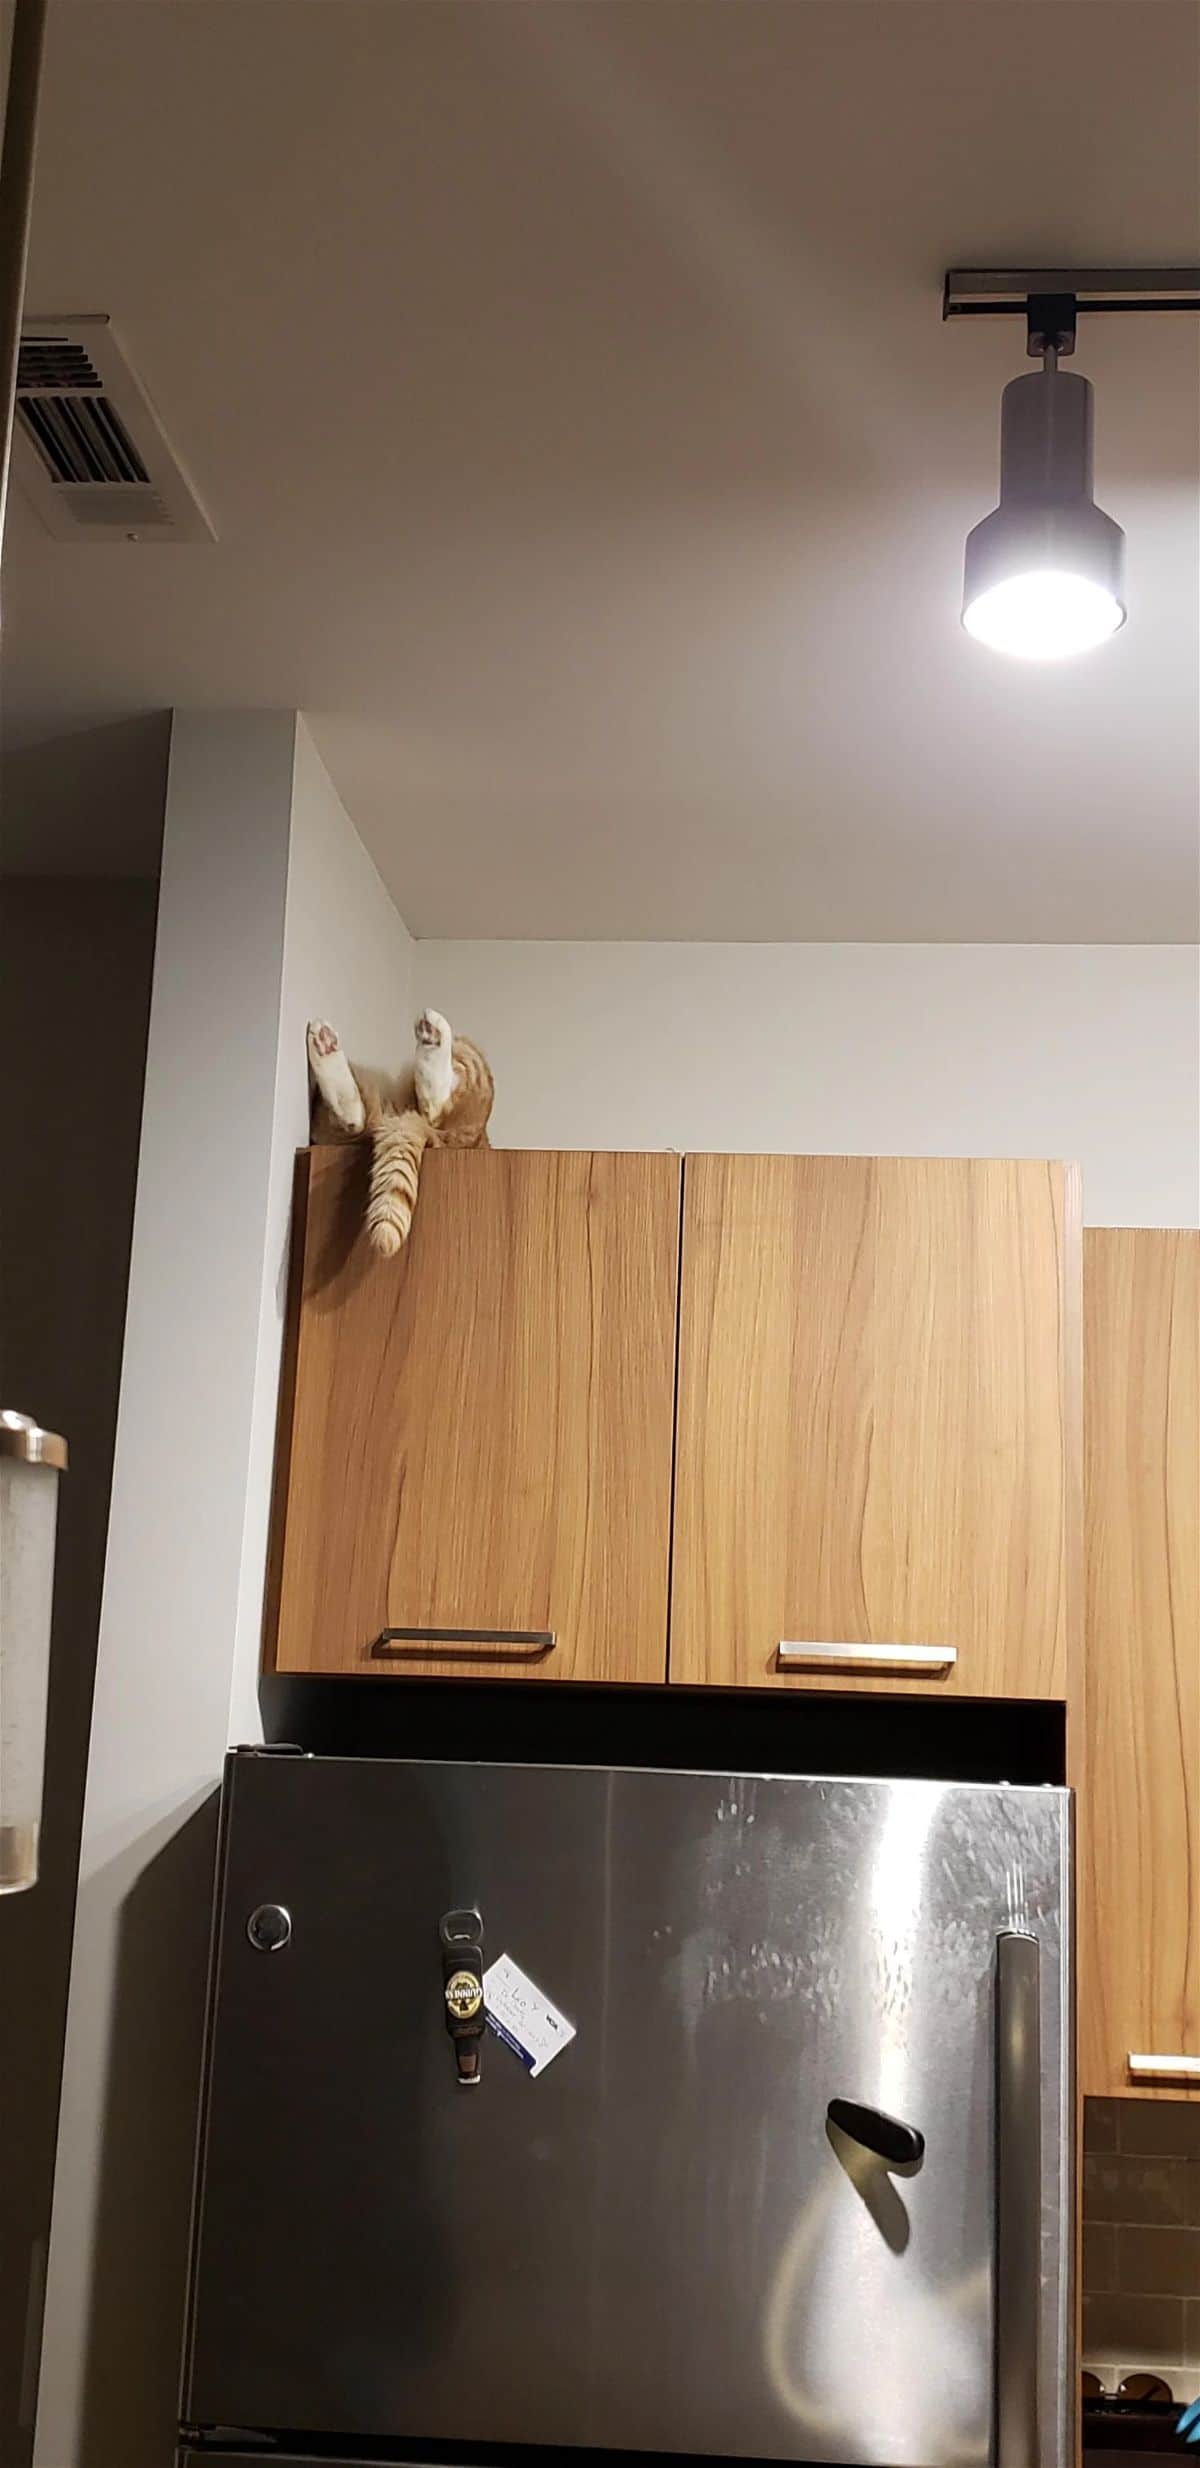 orange and white cat laying belly up on a wooden pantry cupboard